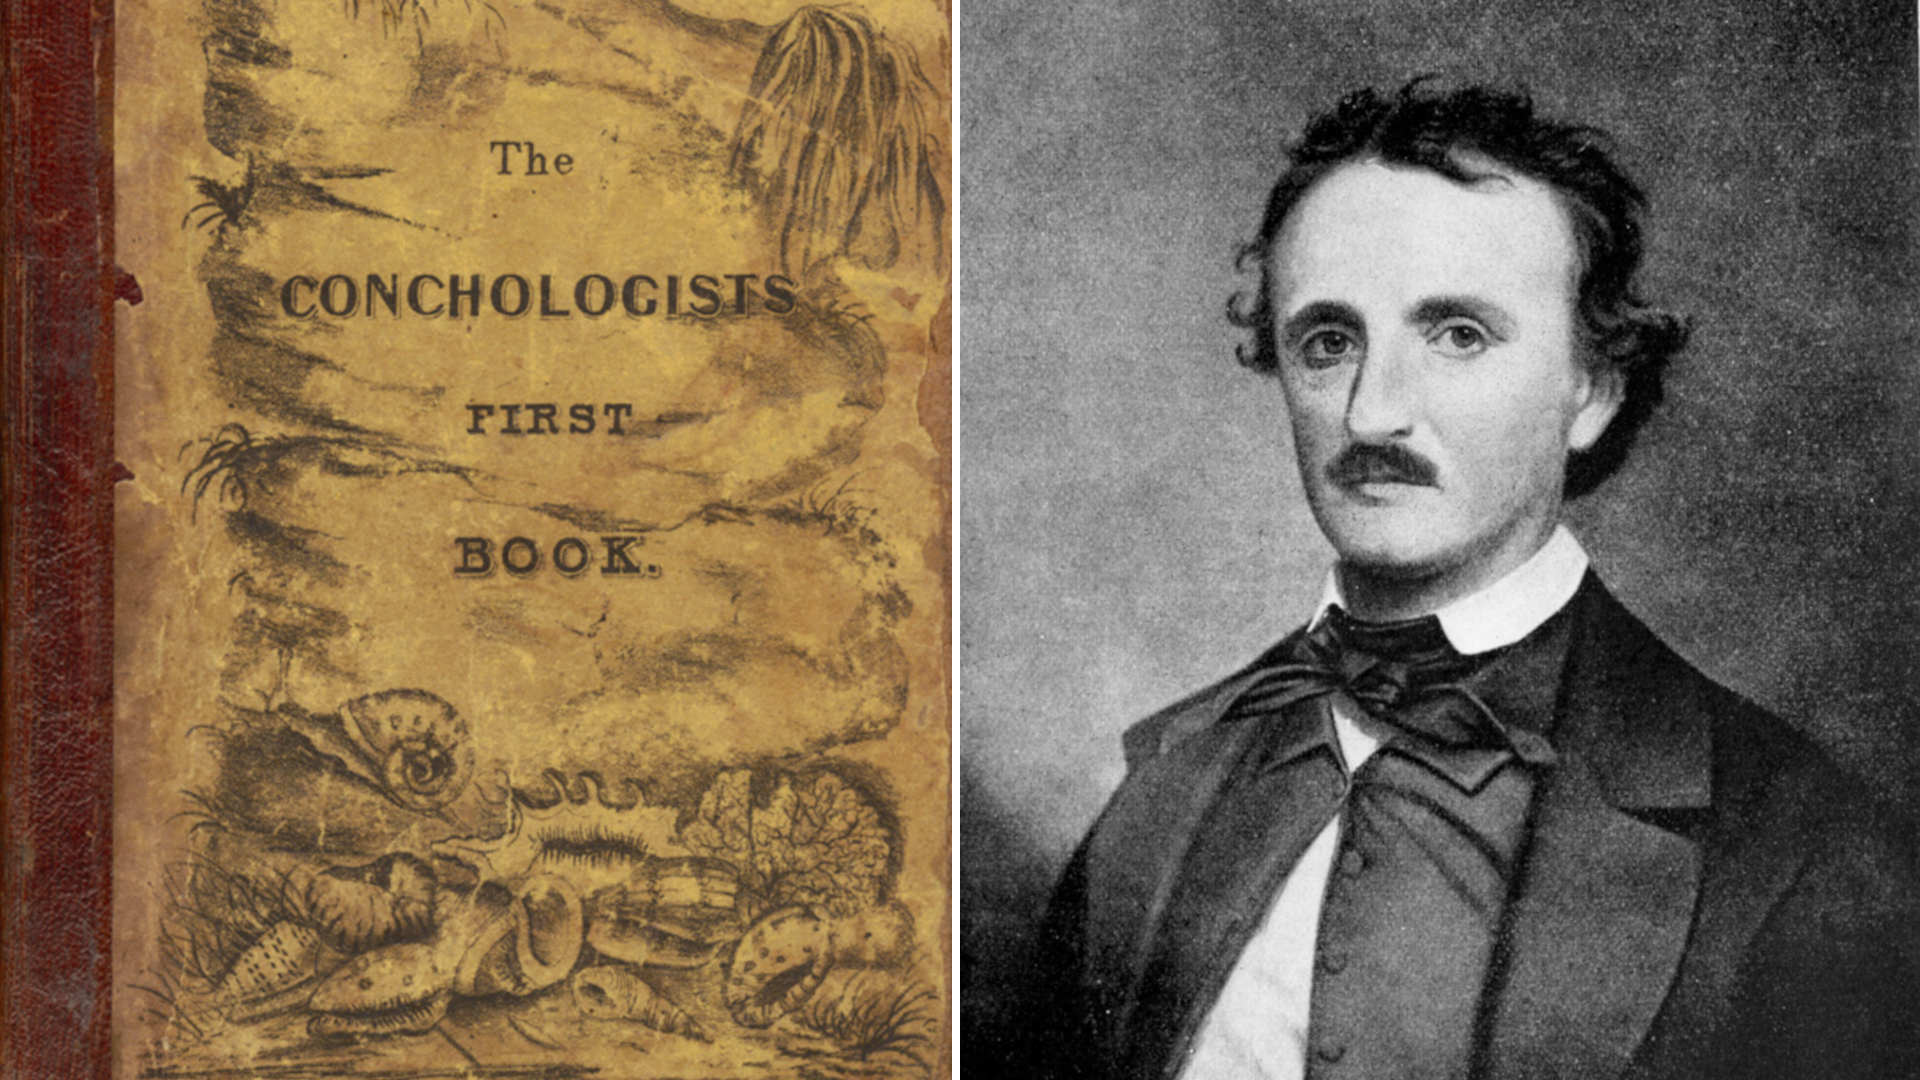 Edgar Allan Poe's bestselling work during his lifetime was a textbook on shells. Though Poe was given the only byline, the original, which Poe edited, was written by scientist Thomas Wyatt.